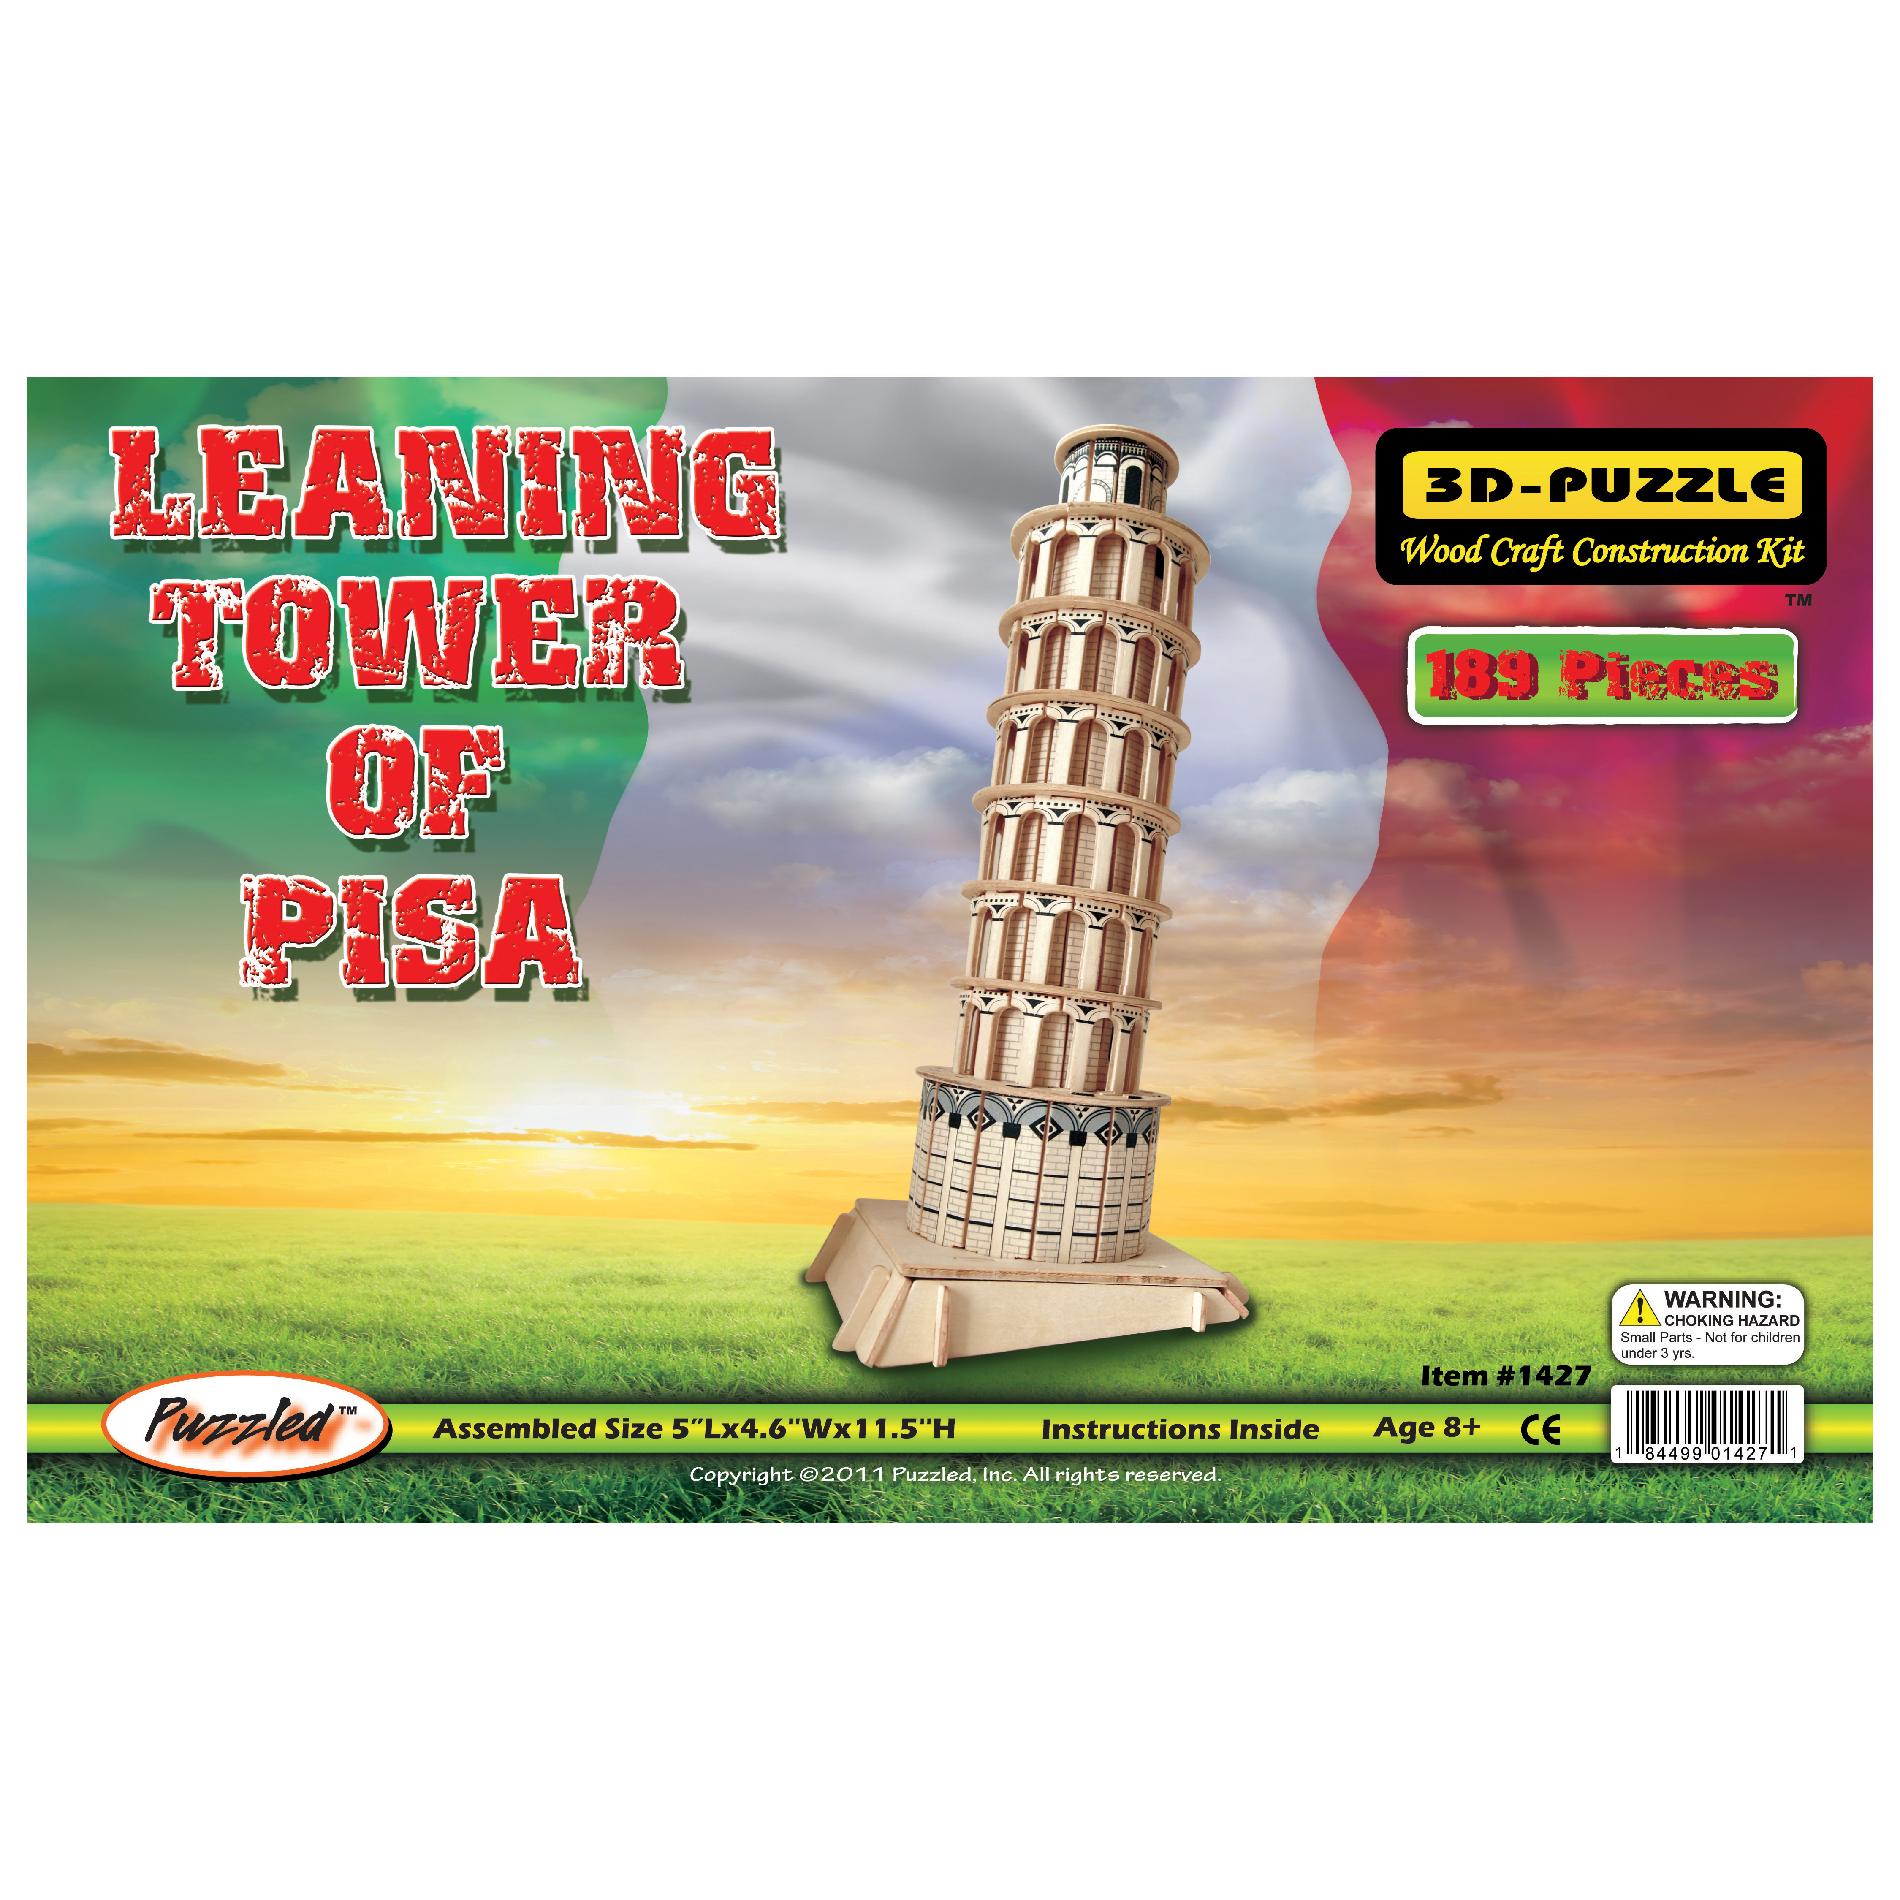 Puzzled Leaning Tower of Pisa